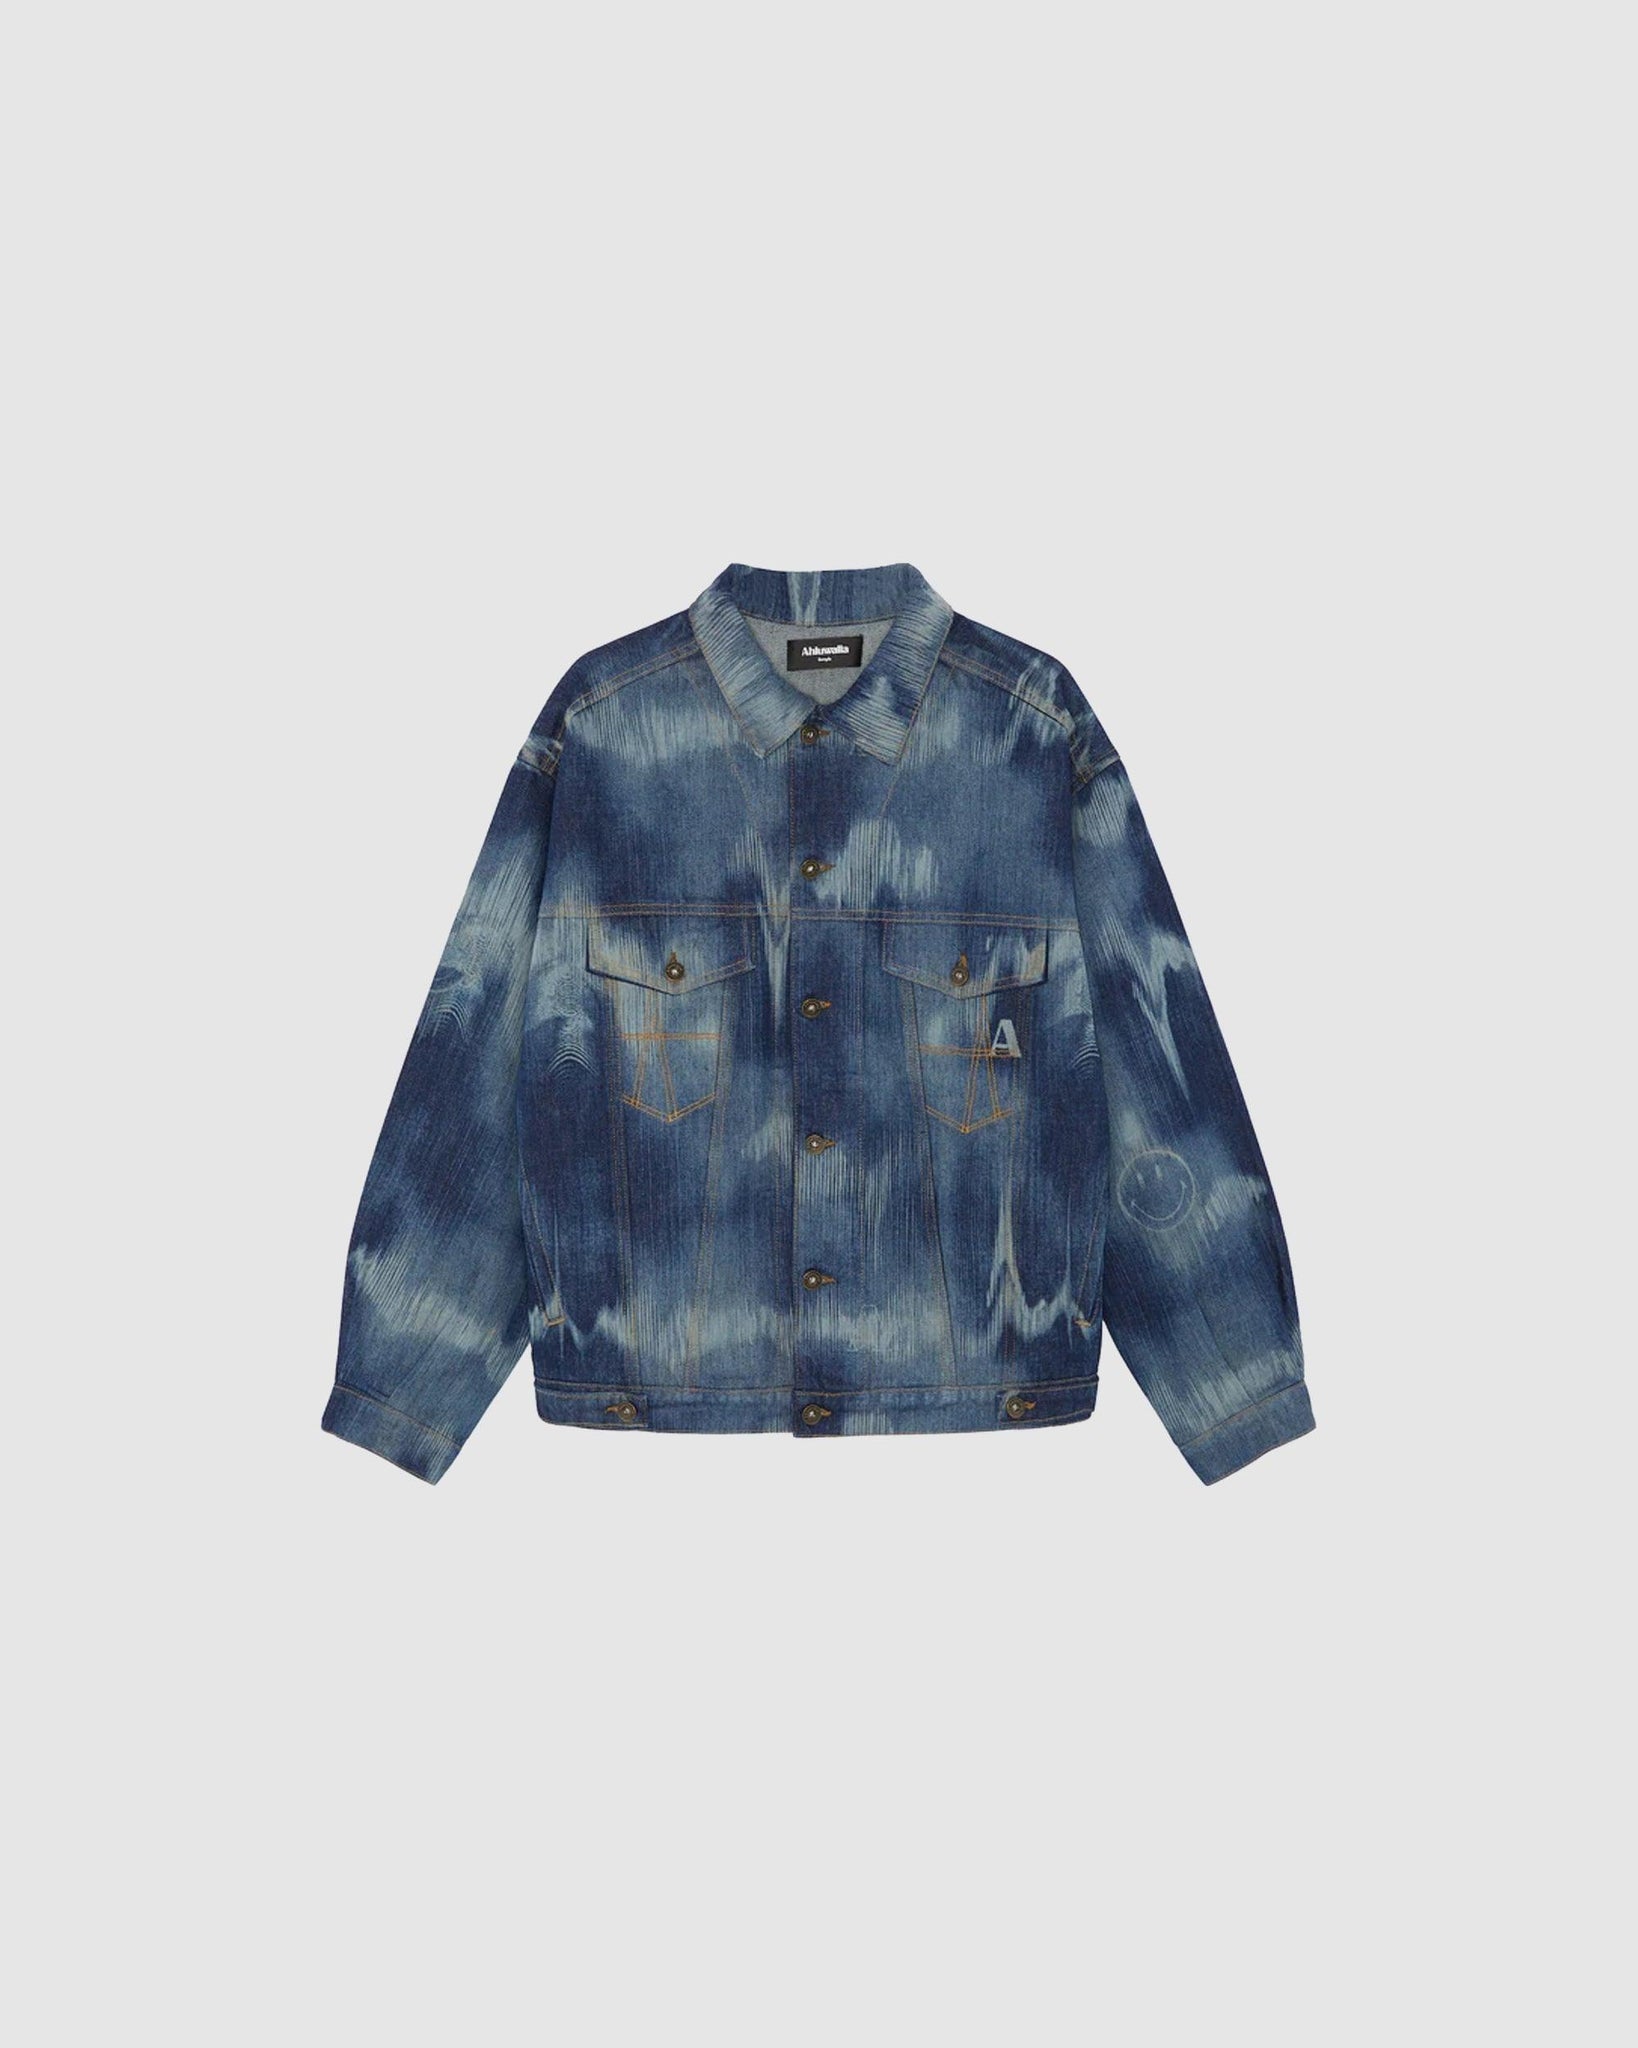 Signature Denim Jacket - {{ collection.title }} - Chinatown Country Club 